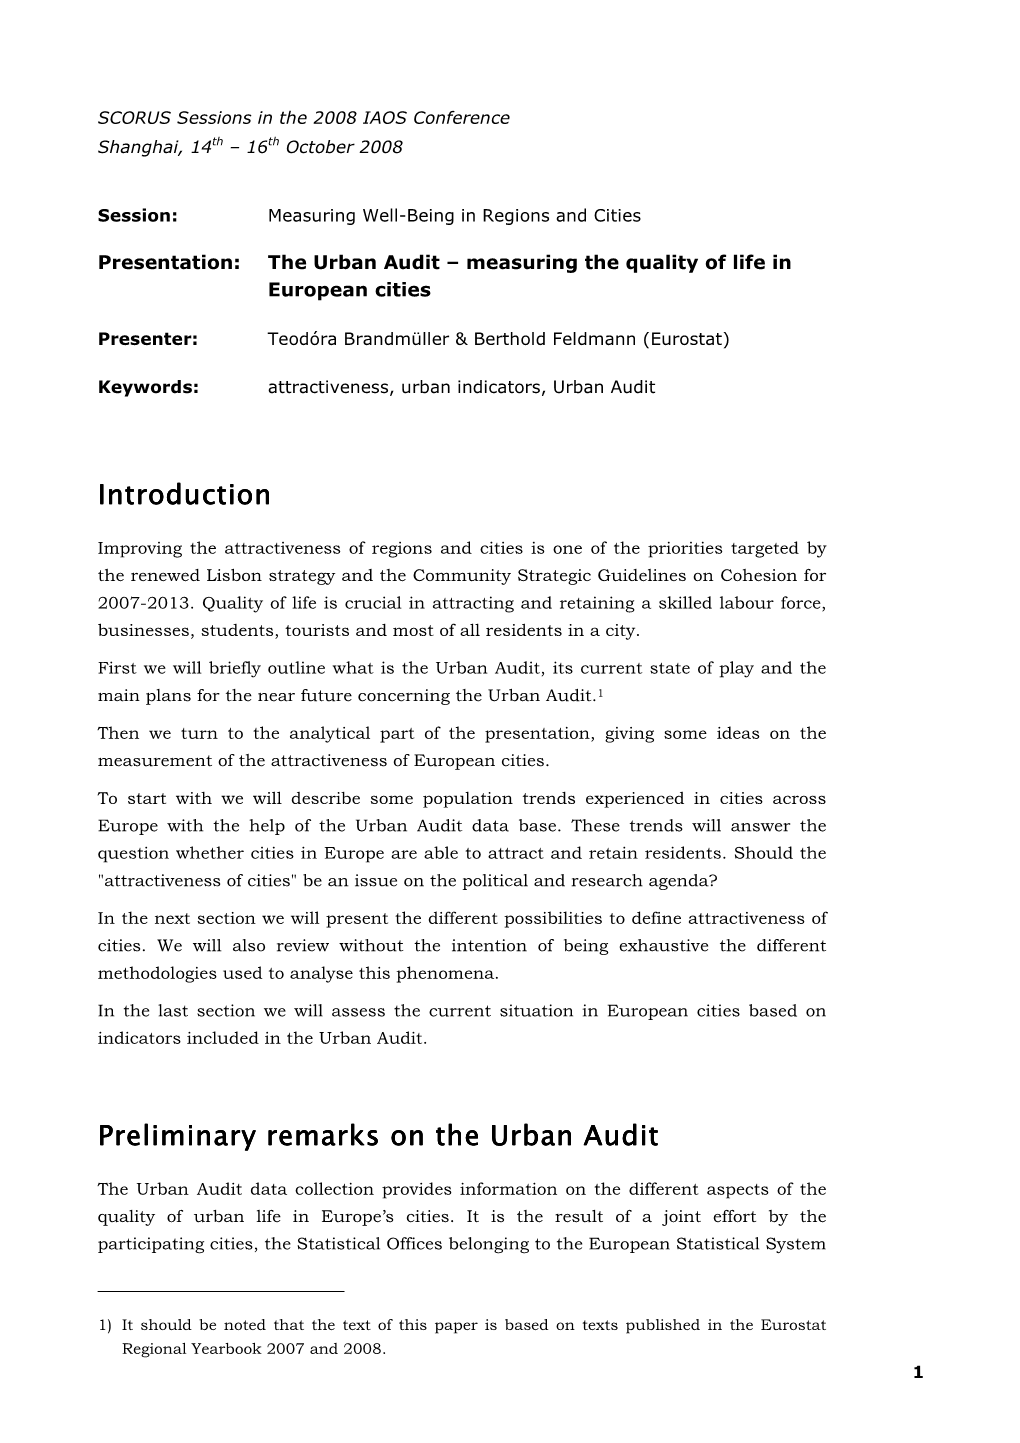 The Urban Audit-Measuring the Quality of Life in European Cities